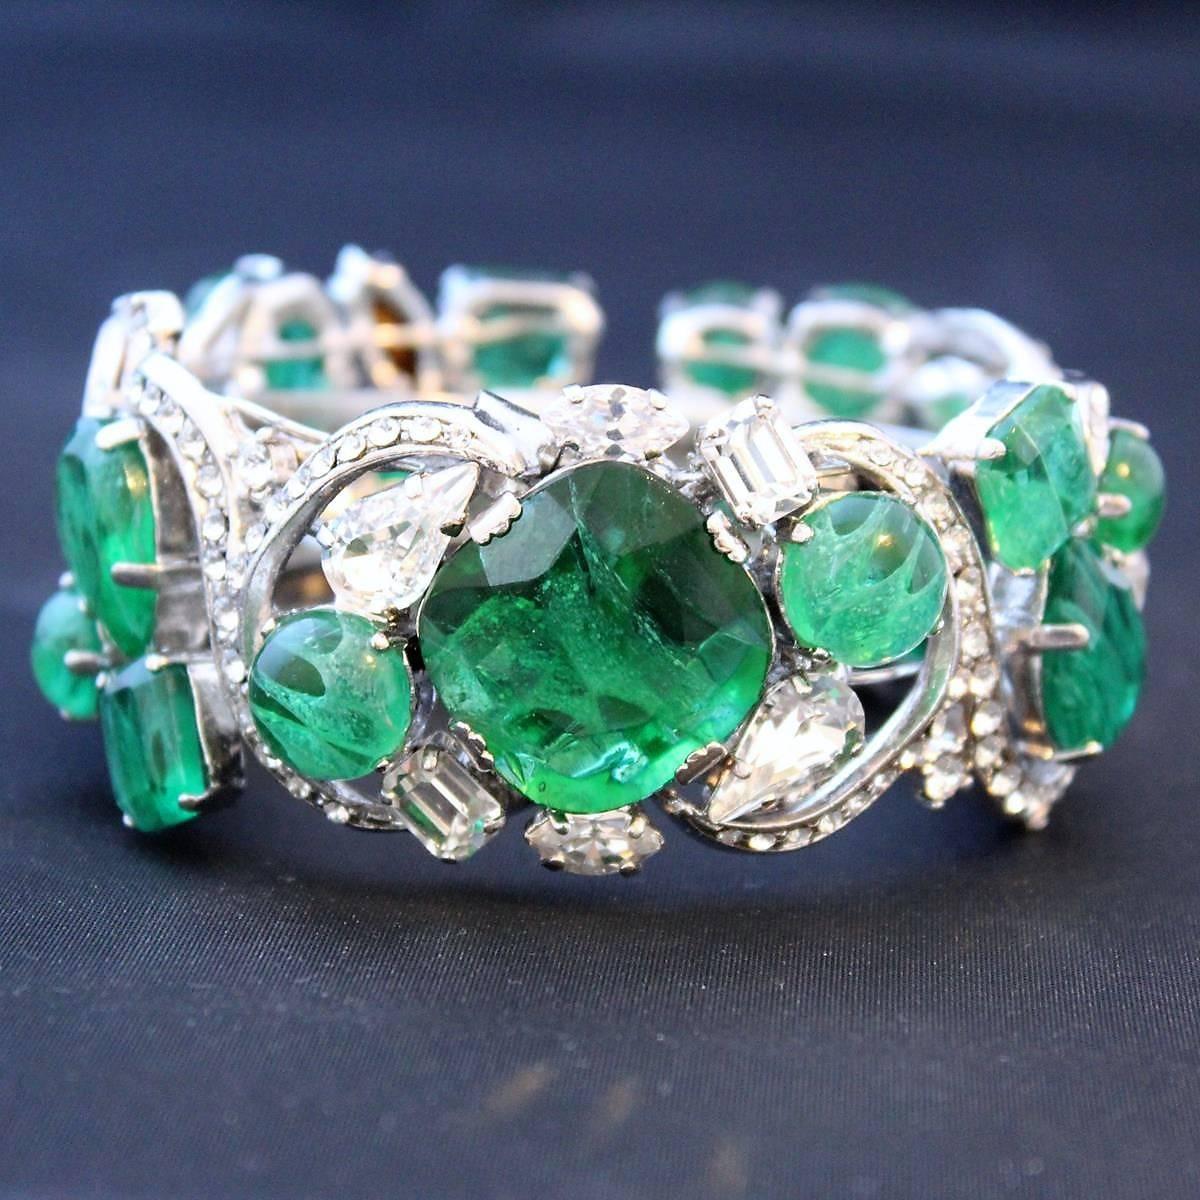 Magnificent masterpiece by Carlo Zini Milano
One of the greatest world bijoux designers
Non allergenic rhodium
Amazing hand creation of class A swarovsky crystals and emerald like resins
Total width cm 3 (1.18 inches)
Wrist cm 17 (6.69 inches)
100%